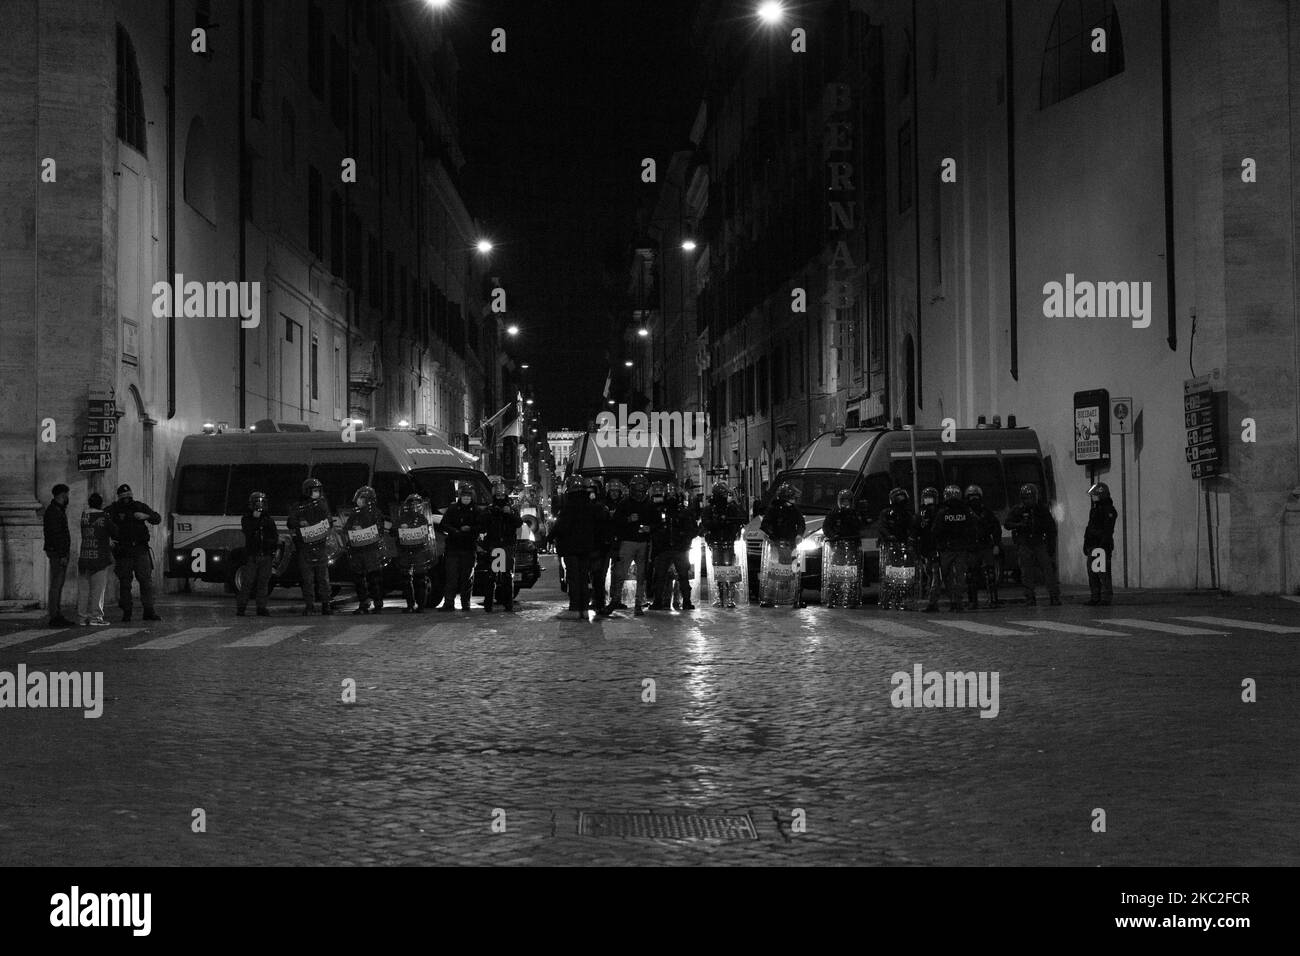 (EDITOR'S NOTE: Image was converted to black and white) The anti-riot police during urban Guerrilla during the far-right demostration at Piazza Del Popolo in Rome, Italy, on October 24, 2020 between the protesters and the police. The demostration was organized by the political party Forza Nuova to protest against the Italian Government and the new restrictions. (Photo by Matteo Trevisan/NurPhoto) Stock Photo